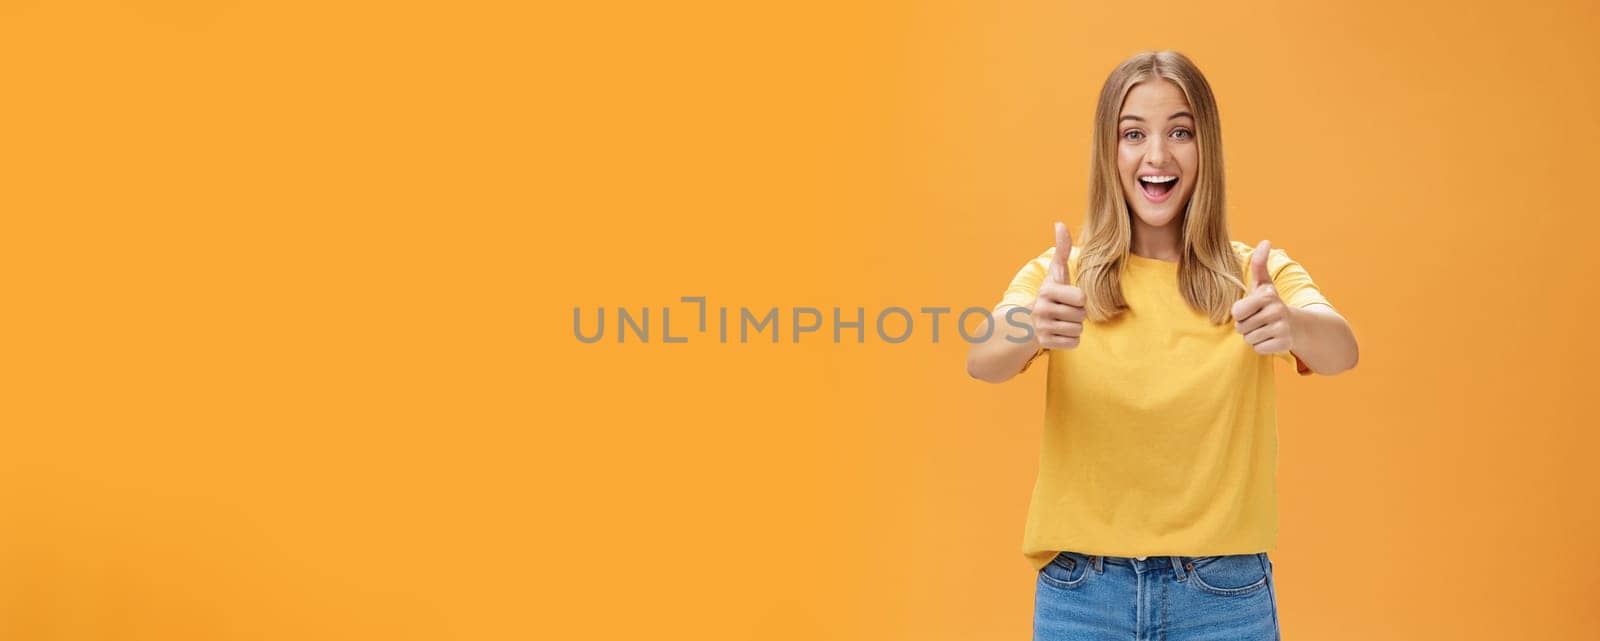 Woman supports with raised thumbs up and amused cheerful smile showing positive attitude expressing like on concept or idea giving approval posing happy and delighted against orange background. Lifestyle.